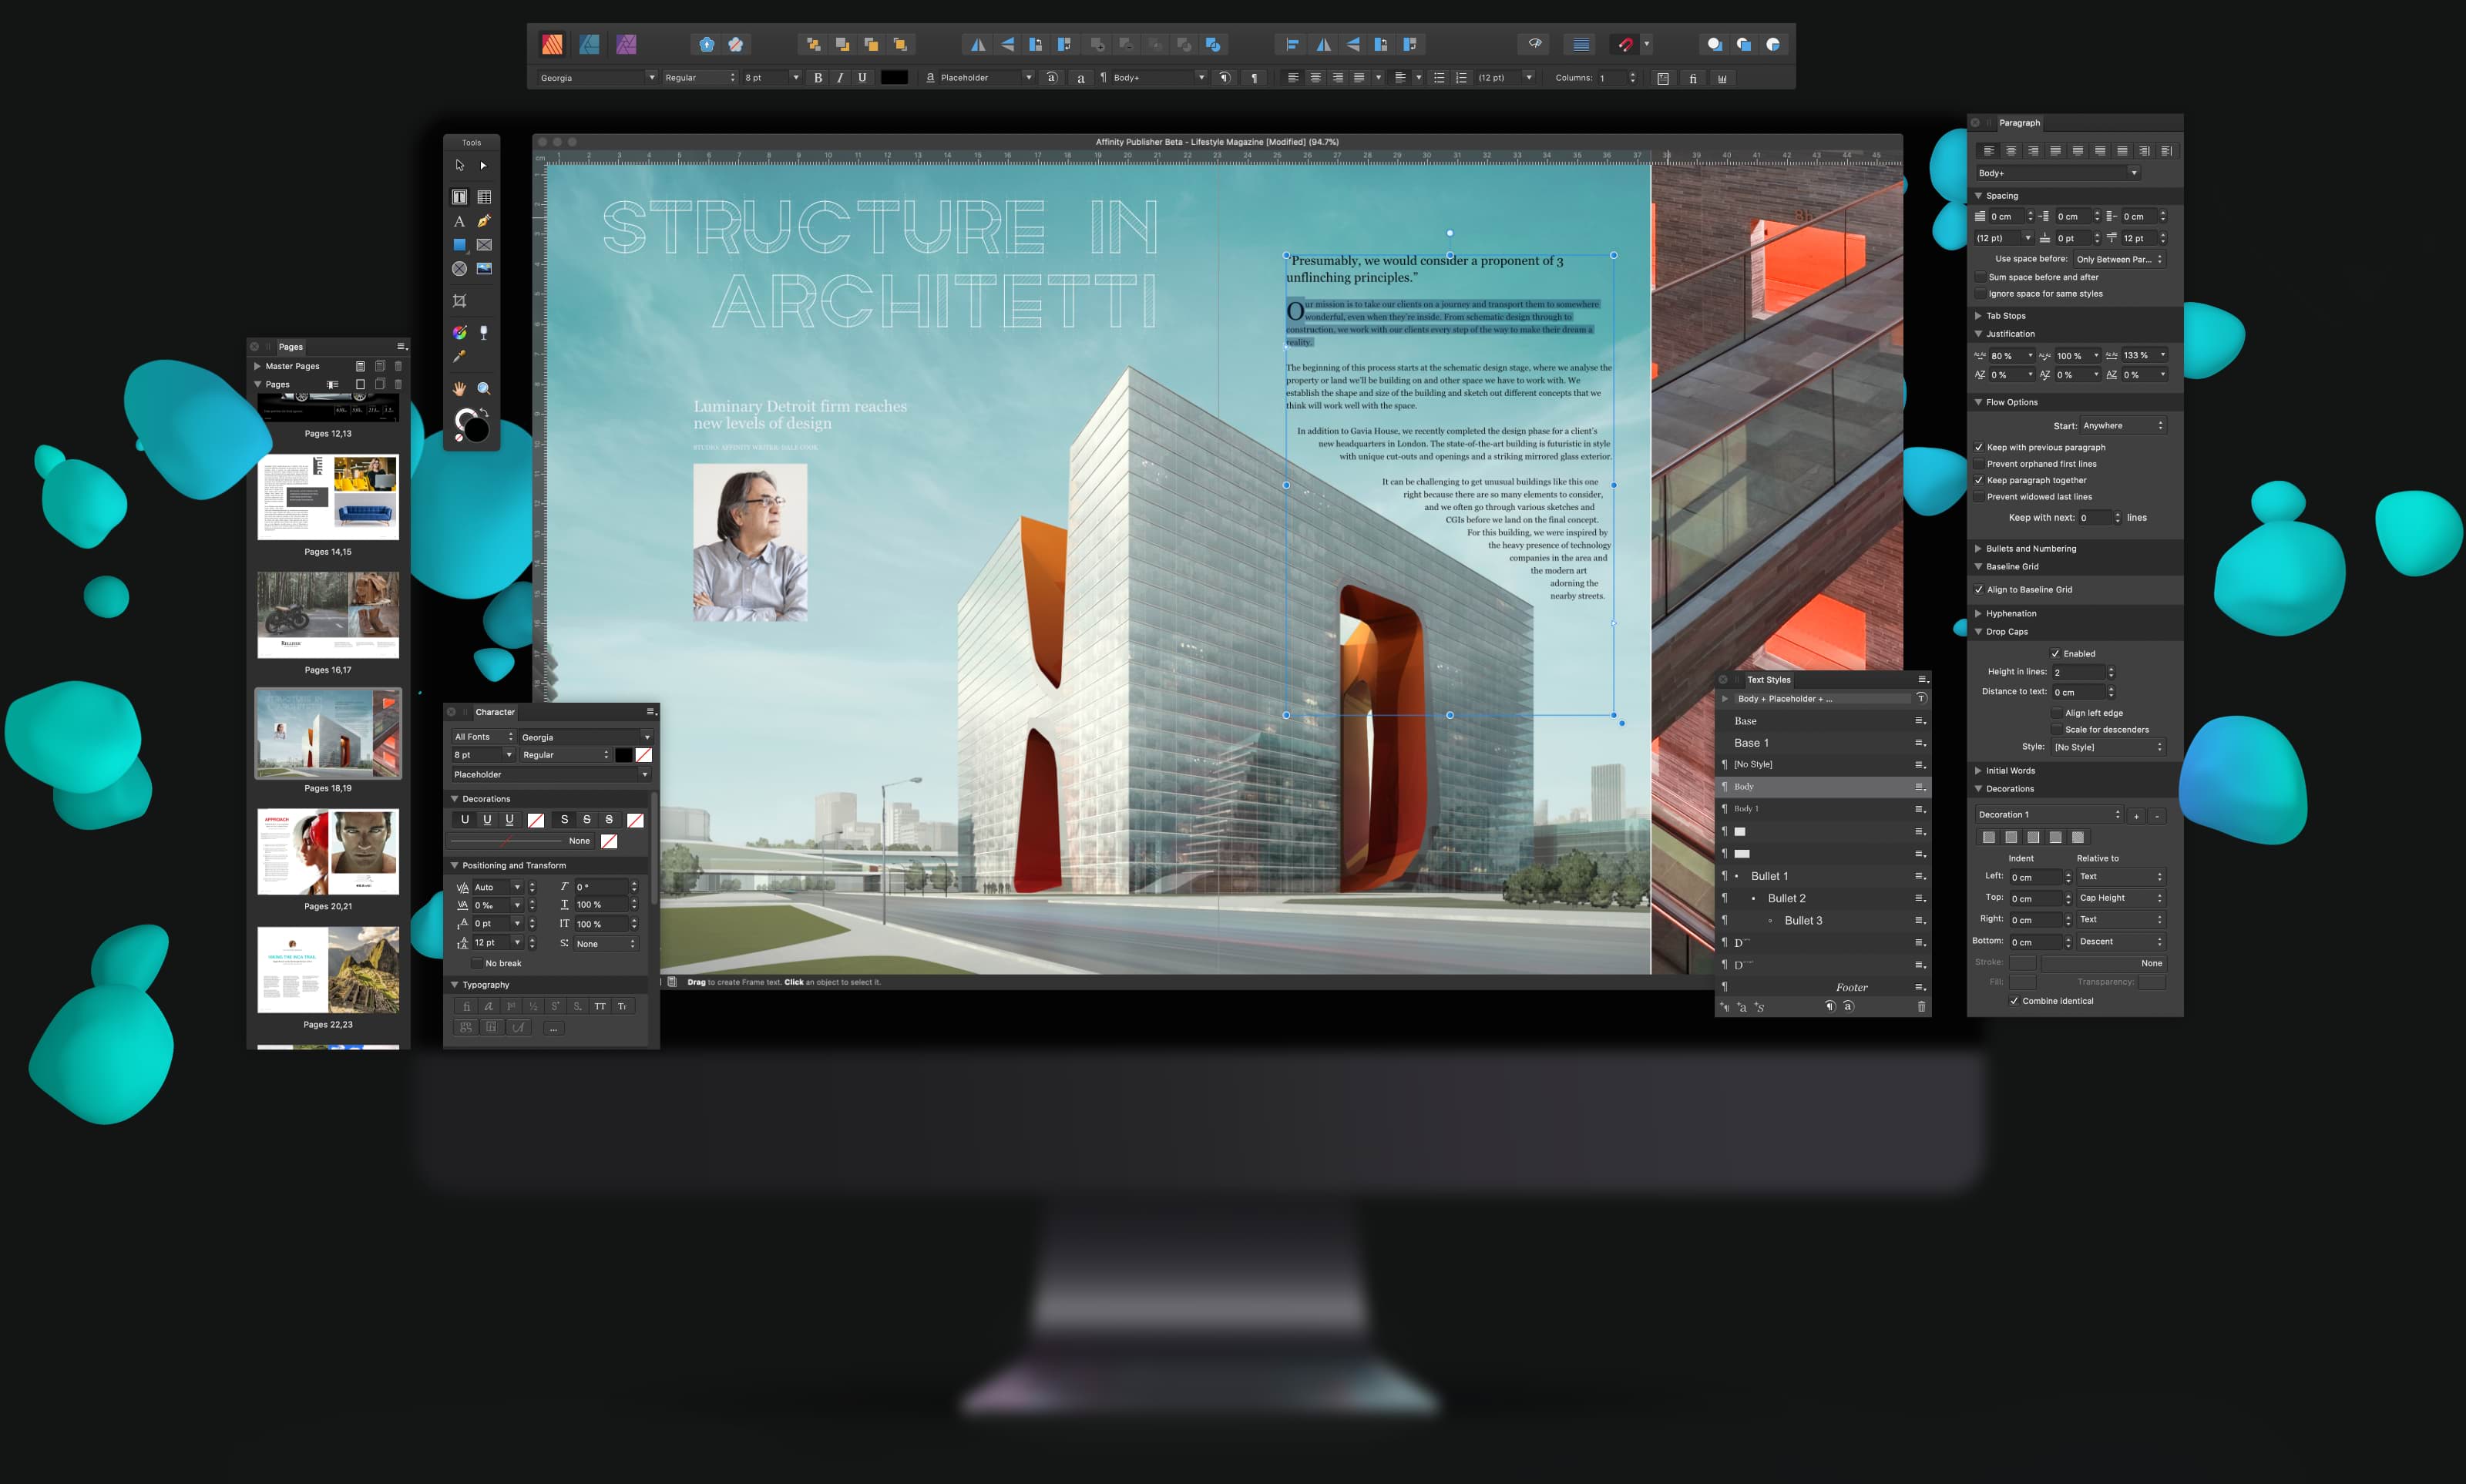 iMac with blue and teal bubbles floating outwards. A page layout mockup is displayed on the screen with the title “Structure in architetti”.